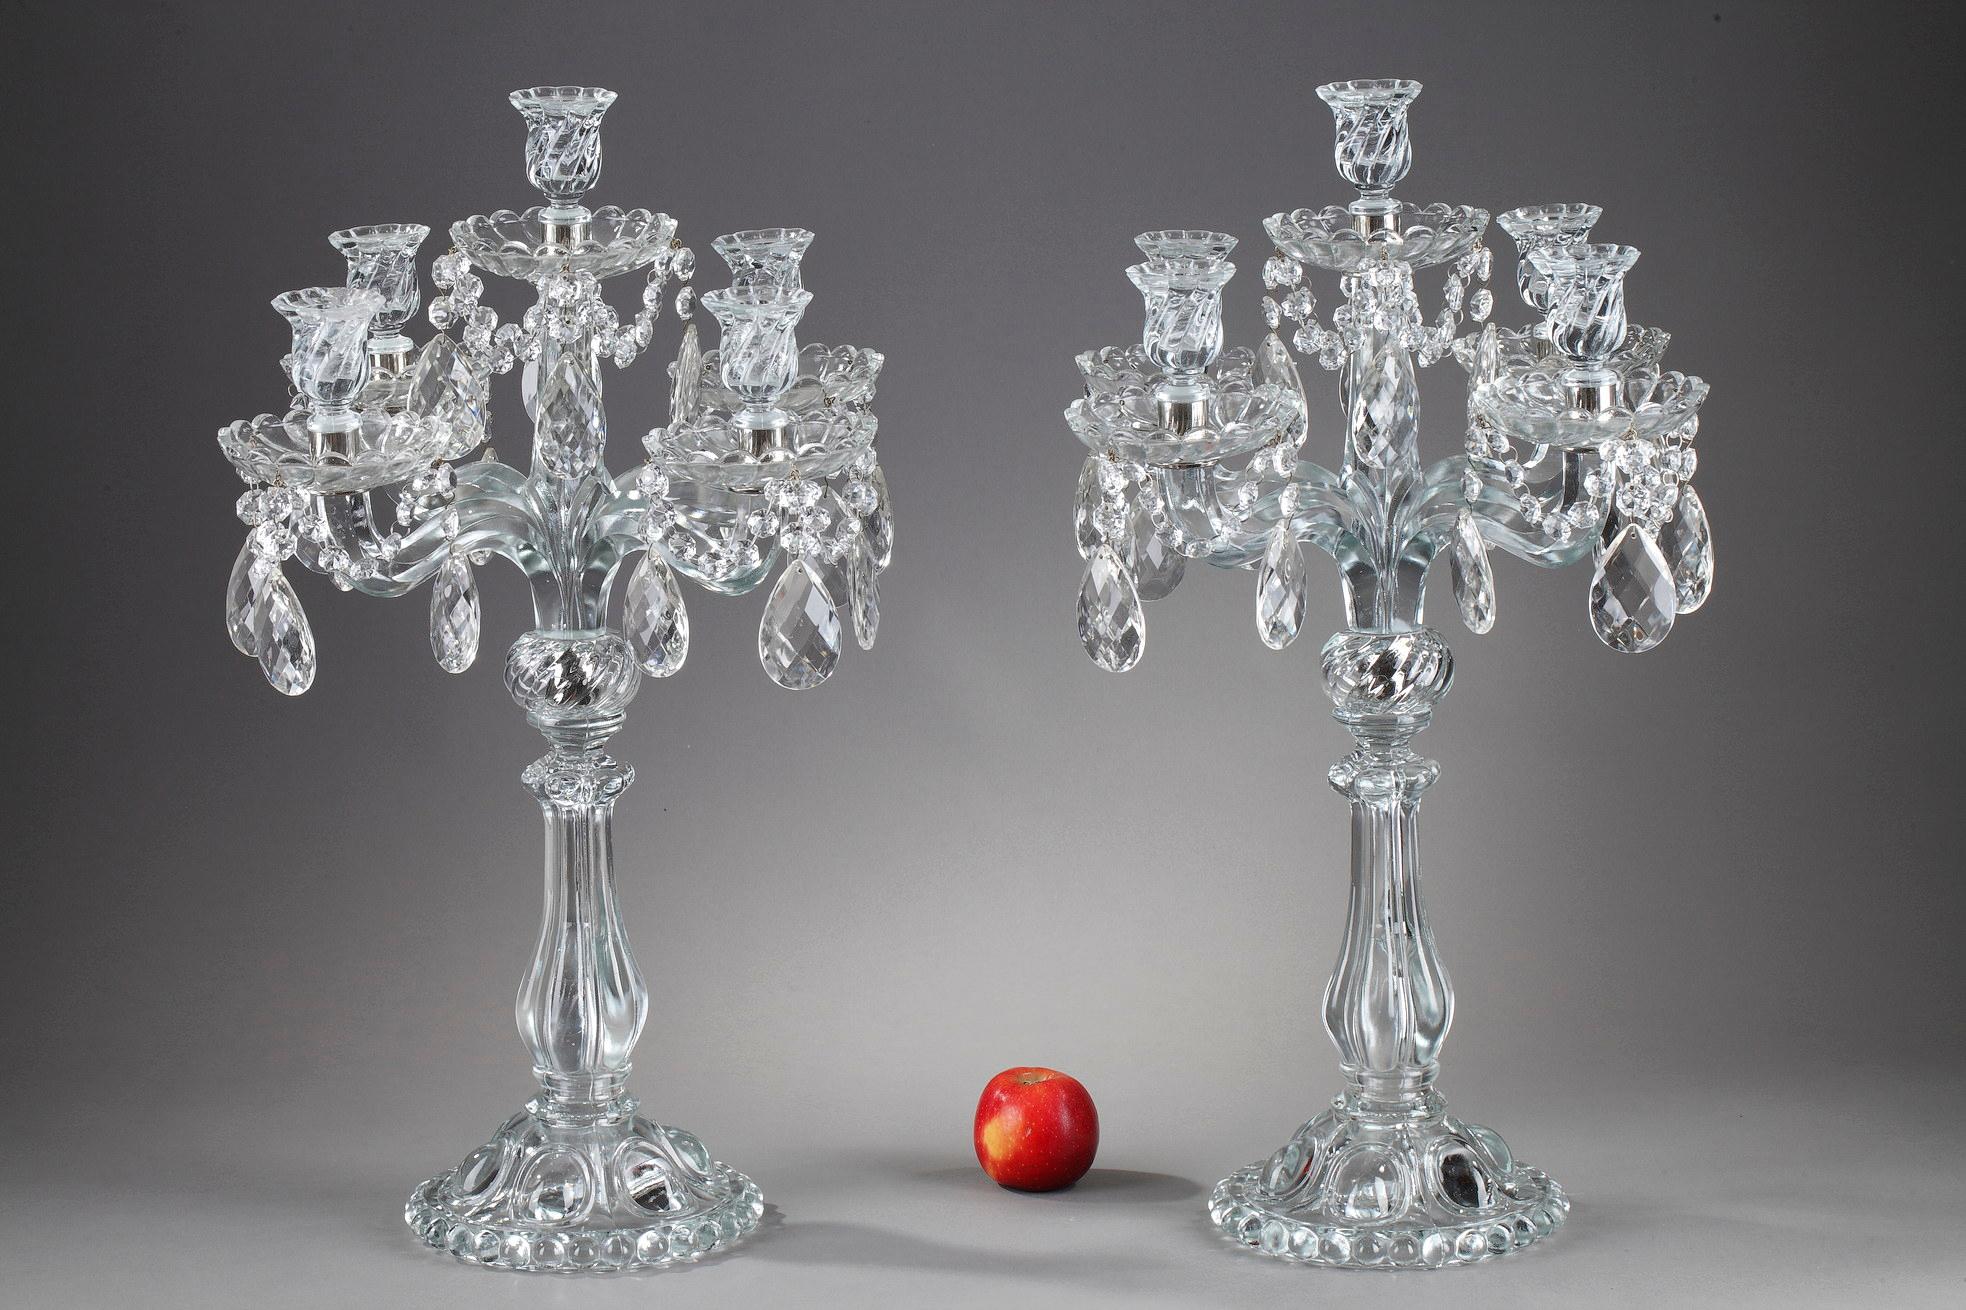 Pair of five-light candelabras in glass and crystal. It is composed of four arms and an upper post. The shafts are ringed and the feet decorated with gadroons. The ensemble is decorated with crystal pendants. 

These candelabras are similar in